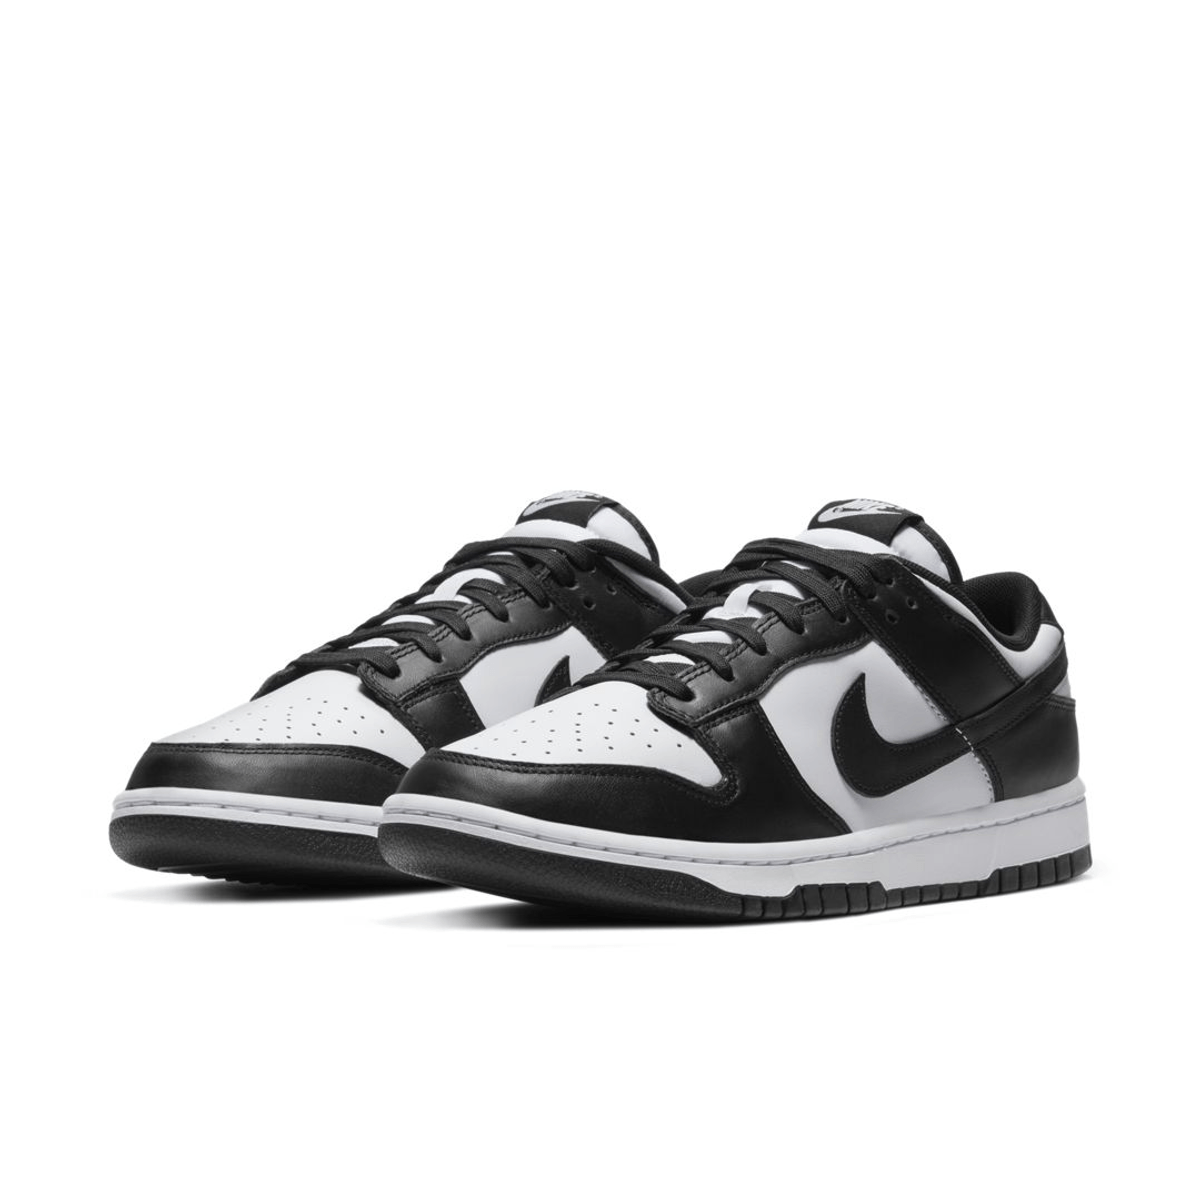 Its That Time Again, The Nike Dunk Low Panda Is Set For Their Month Re-Up